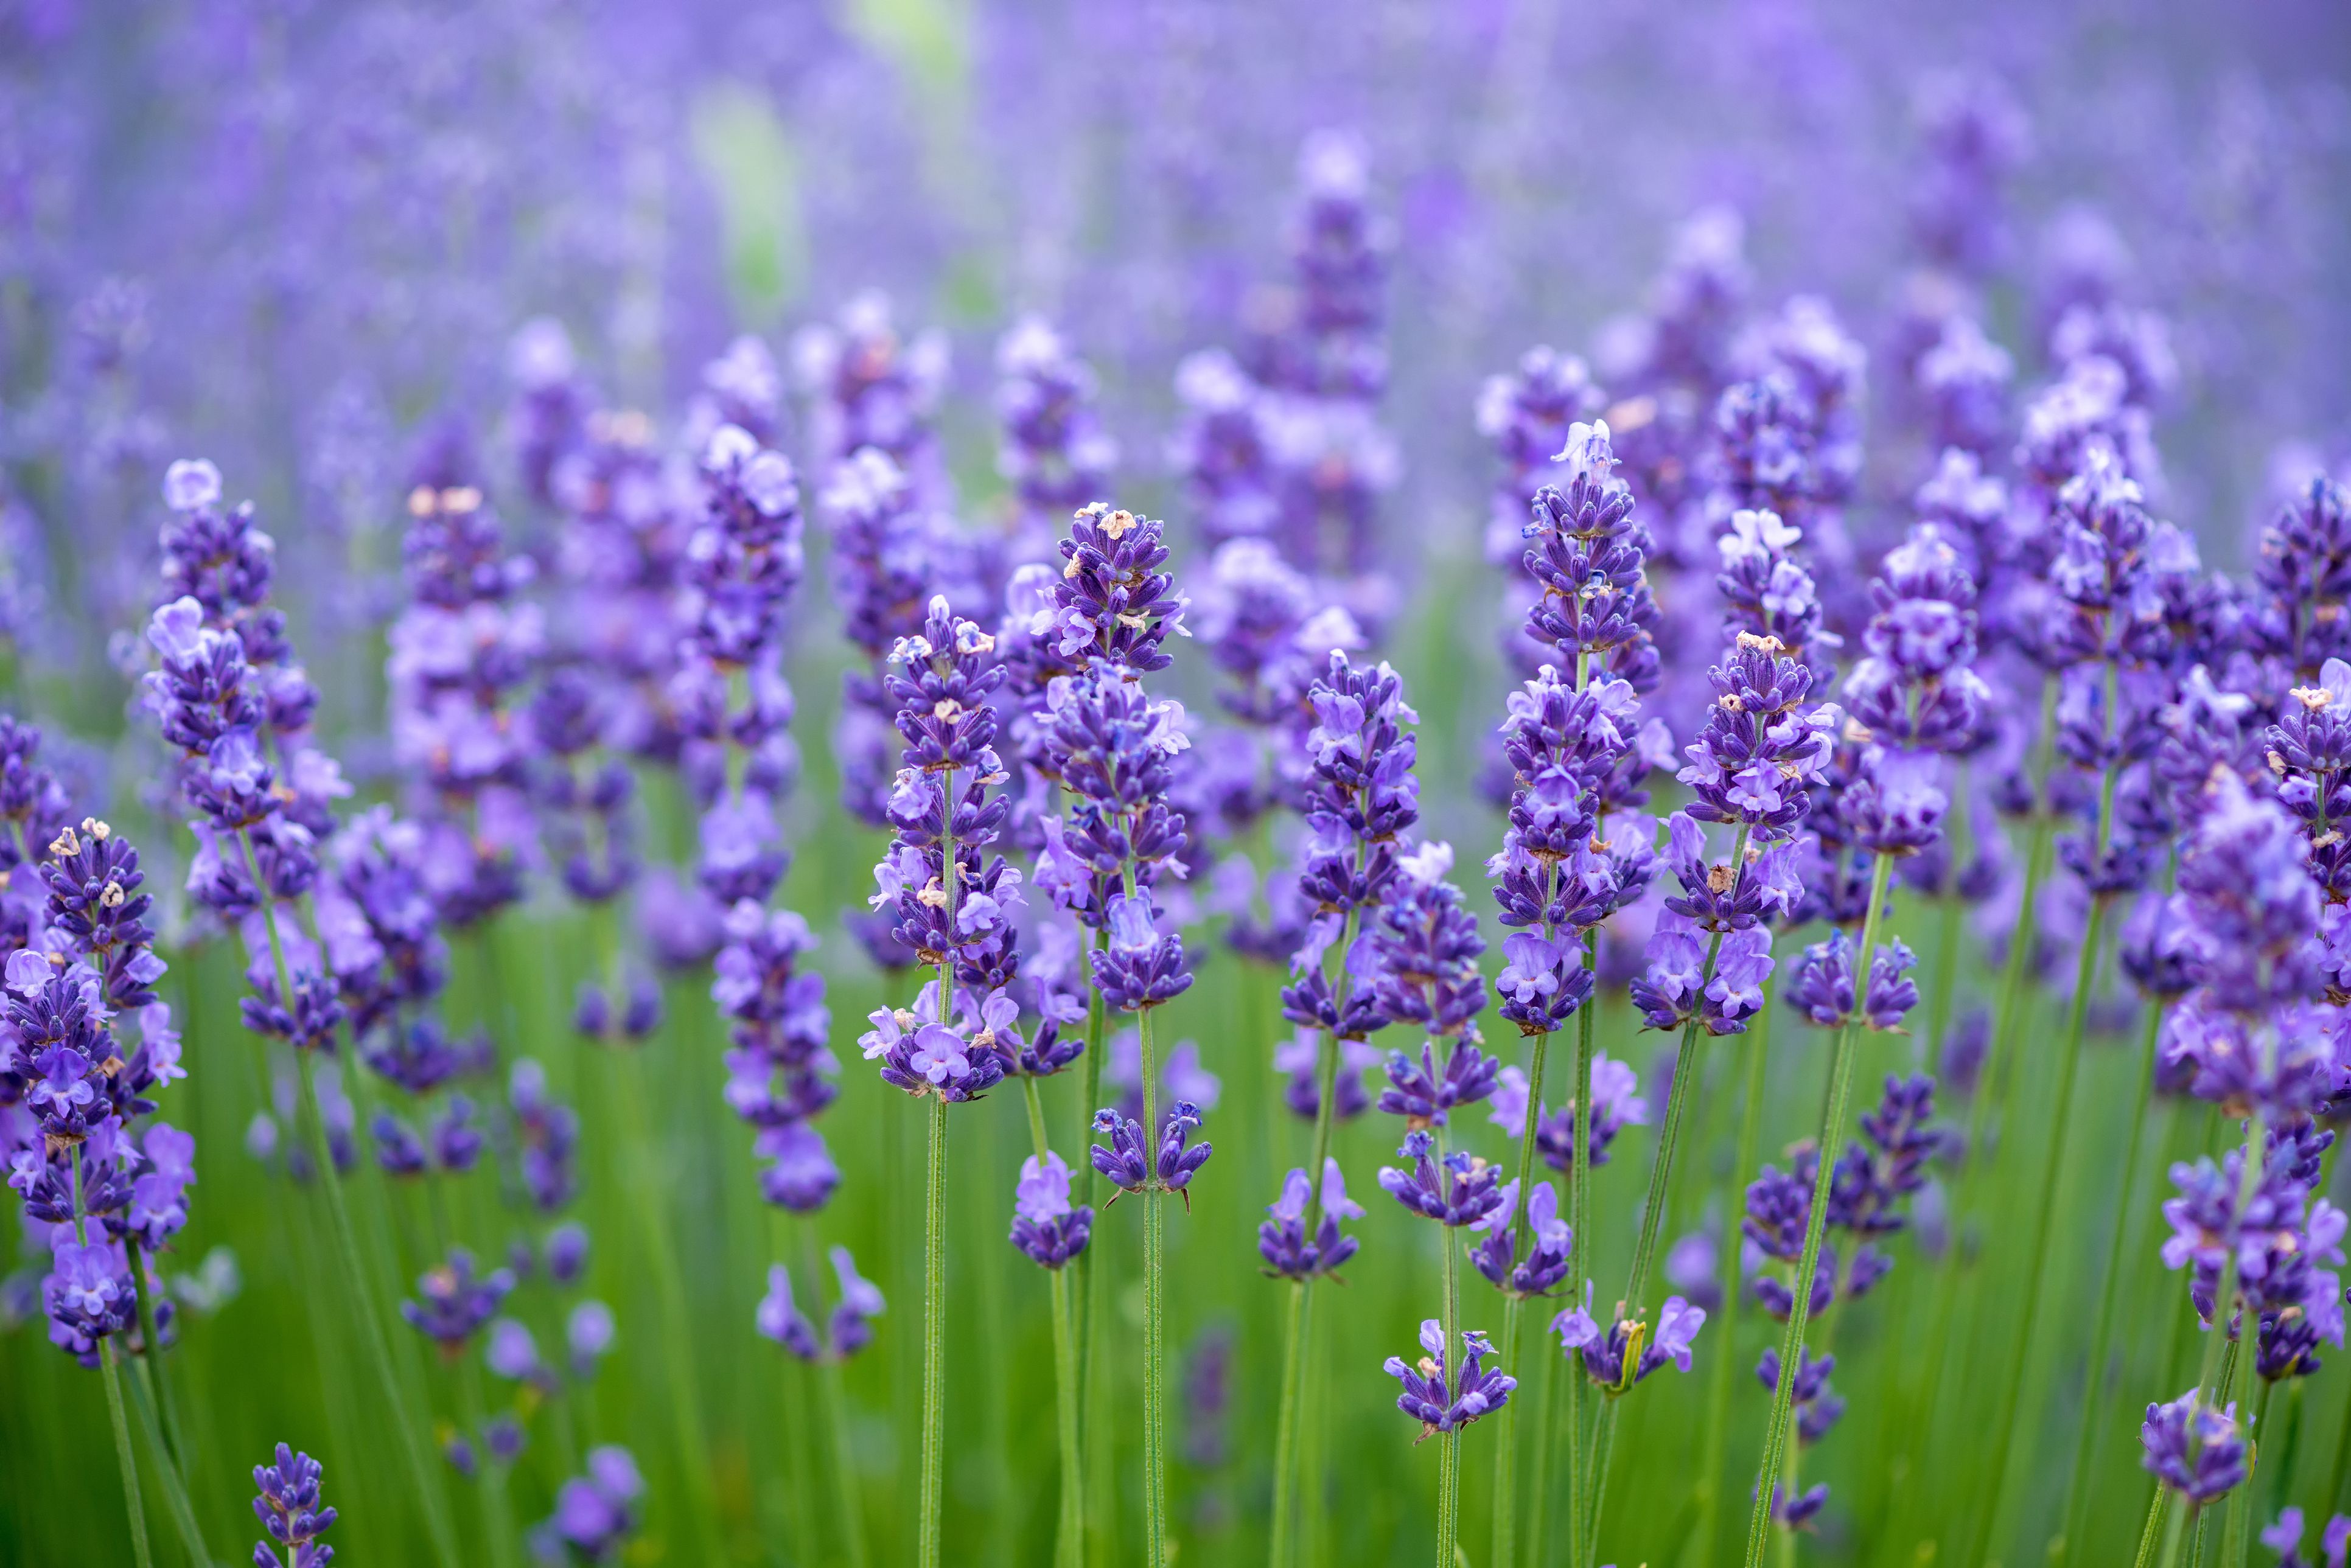 How to Grow Lavender Indoors in Pots — Growing Lavender From Seeds